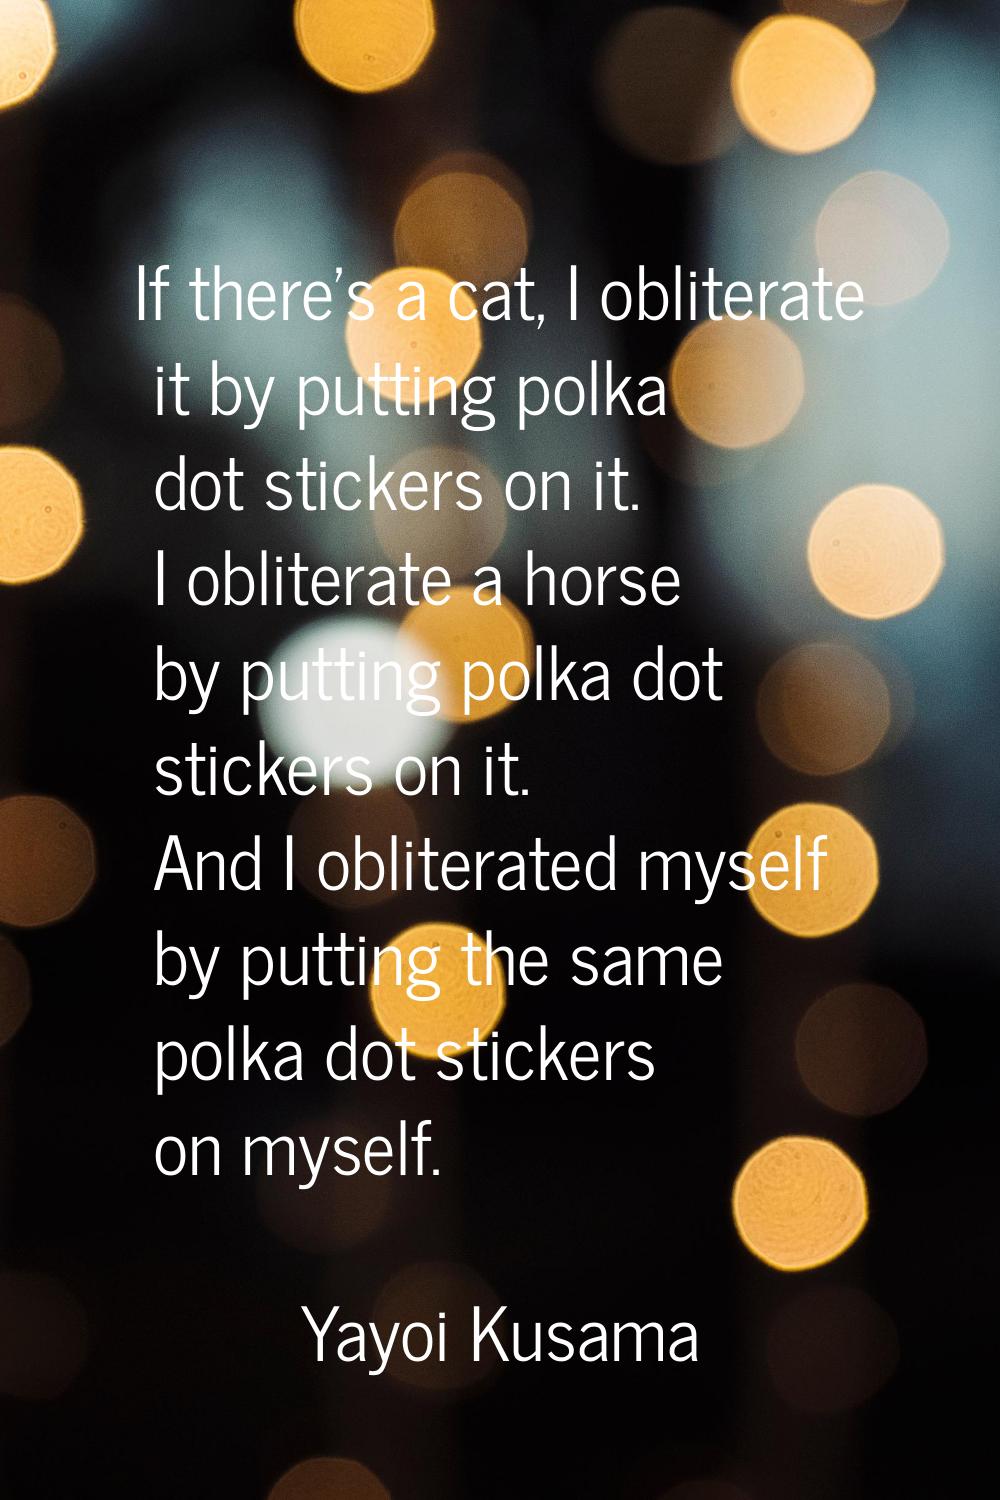 If there's a cat, I obliterate it by putting polka dot stickers on it. I obliterate a horse by putt